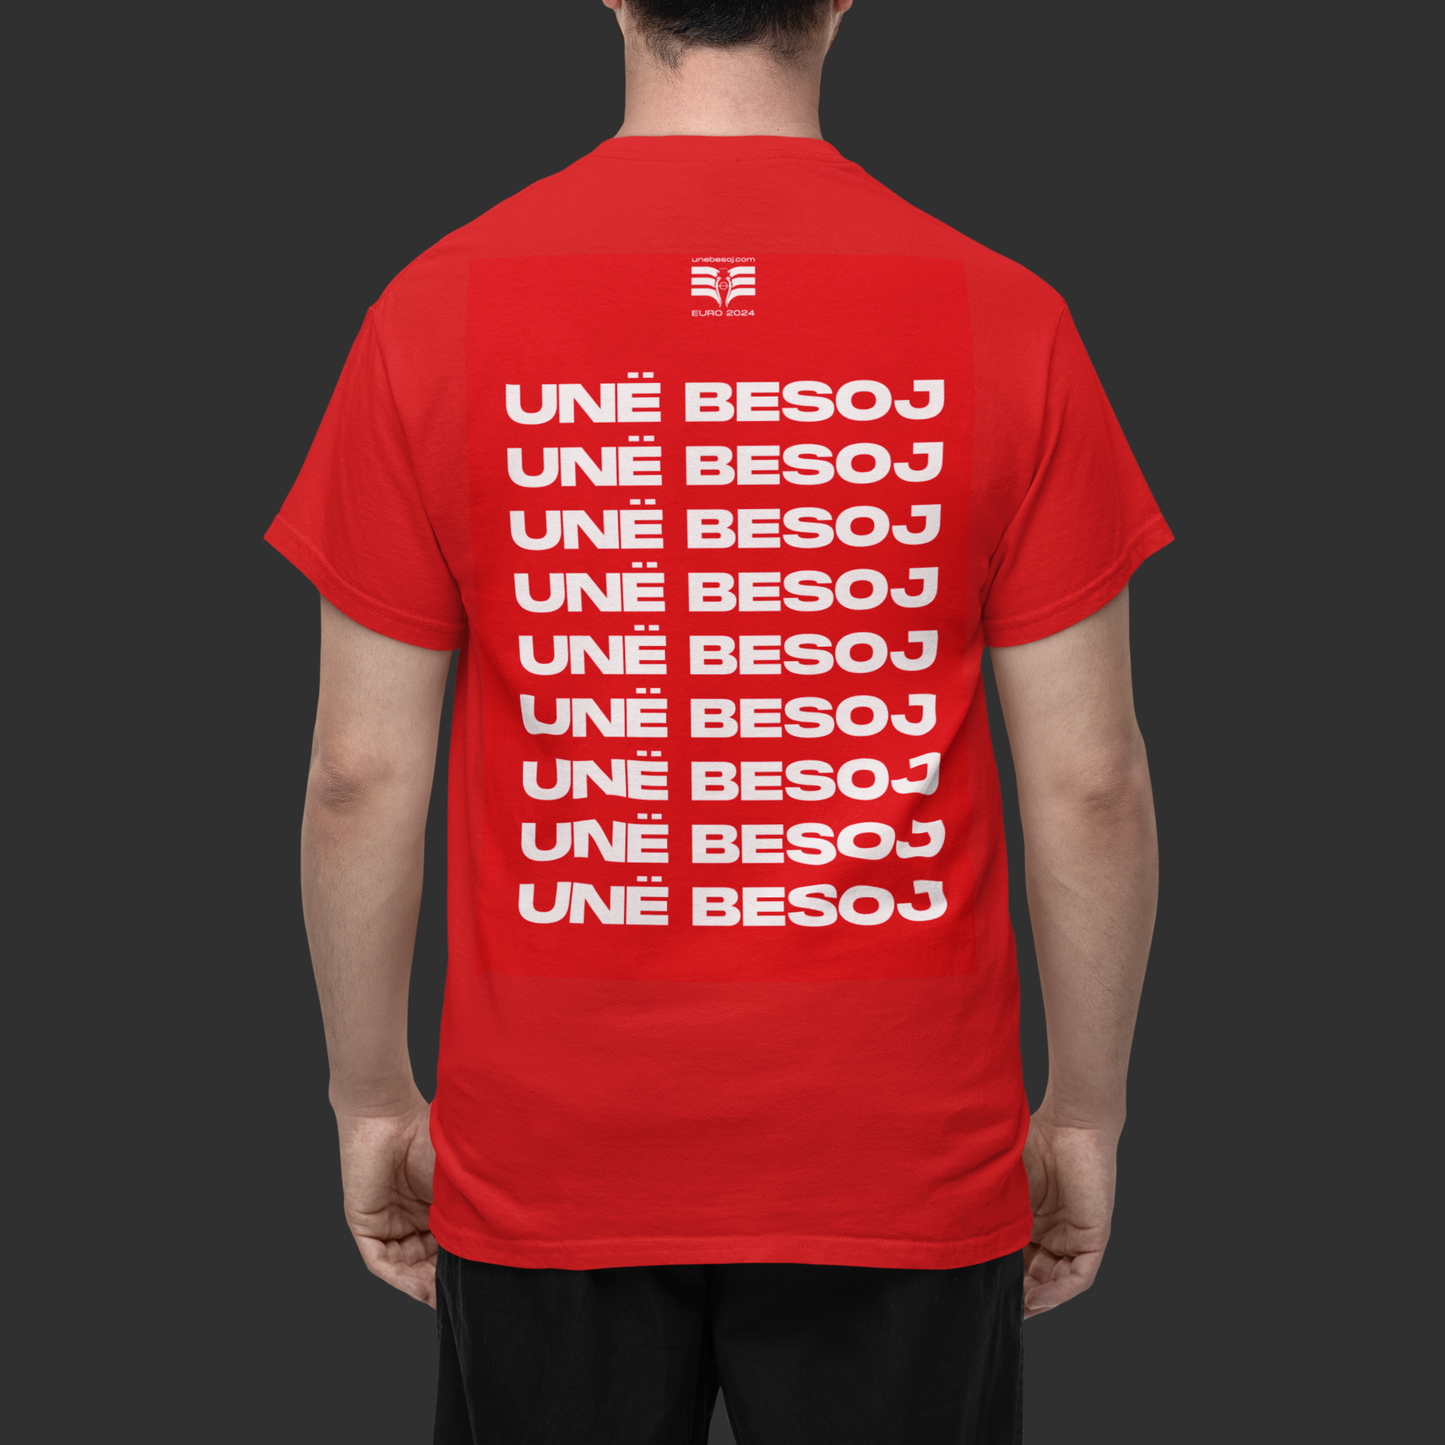 RED T-SHIRT WITH GRAFFITI - PATTERN ON THE BACK